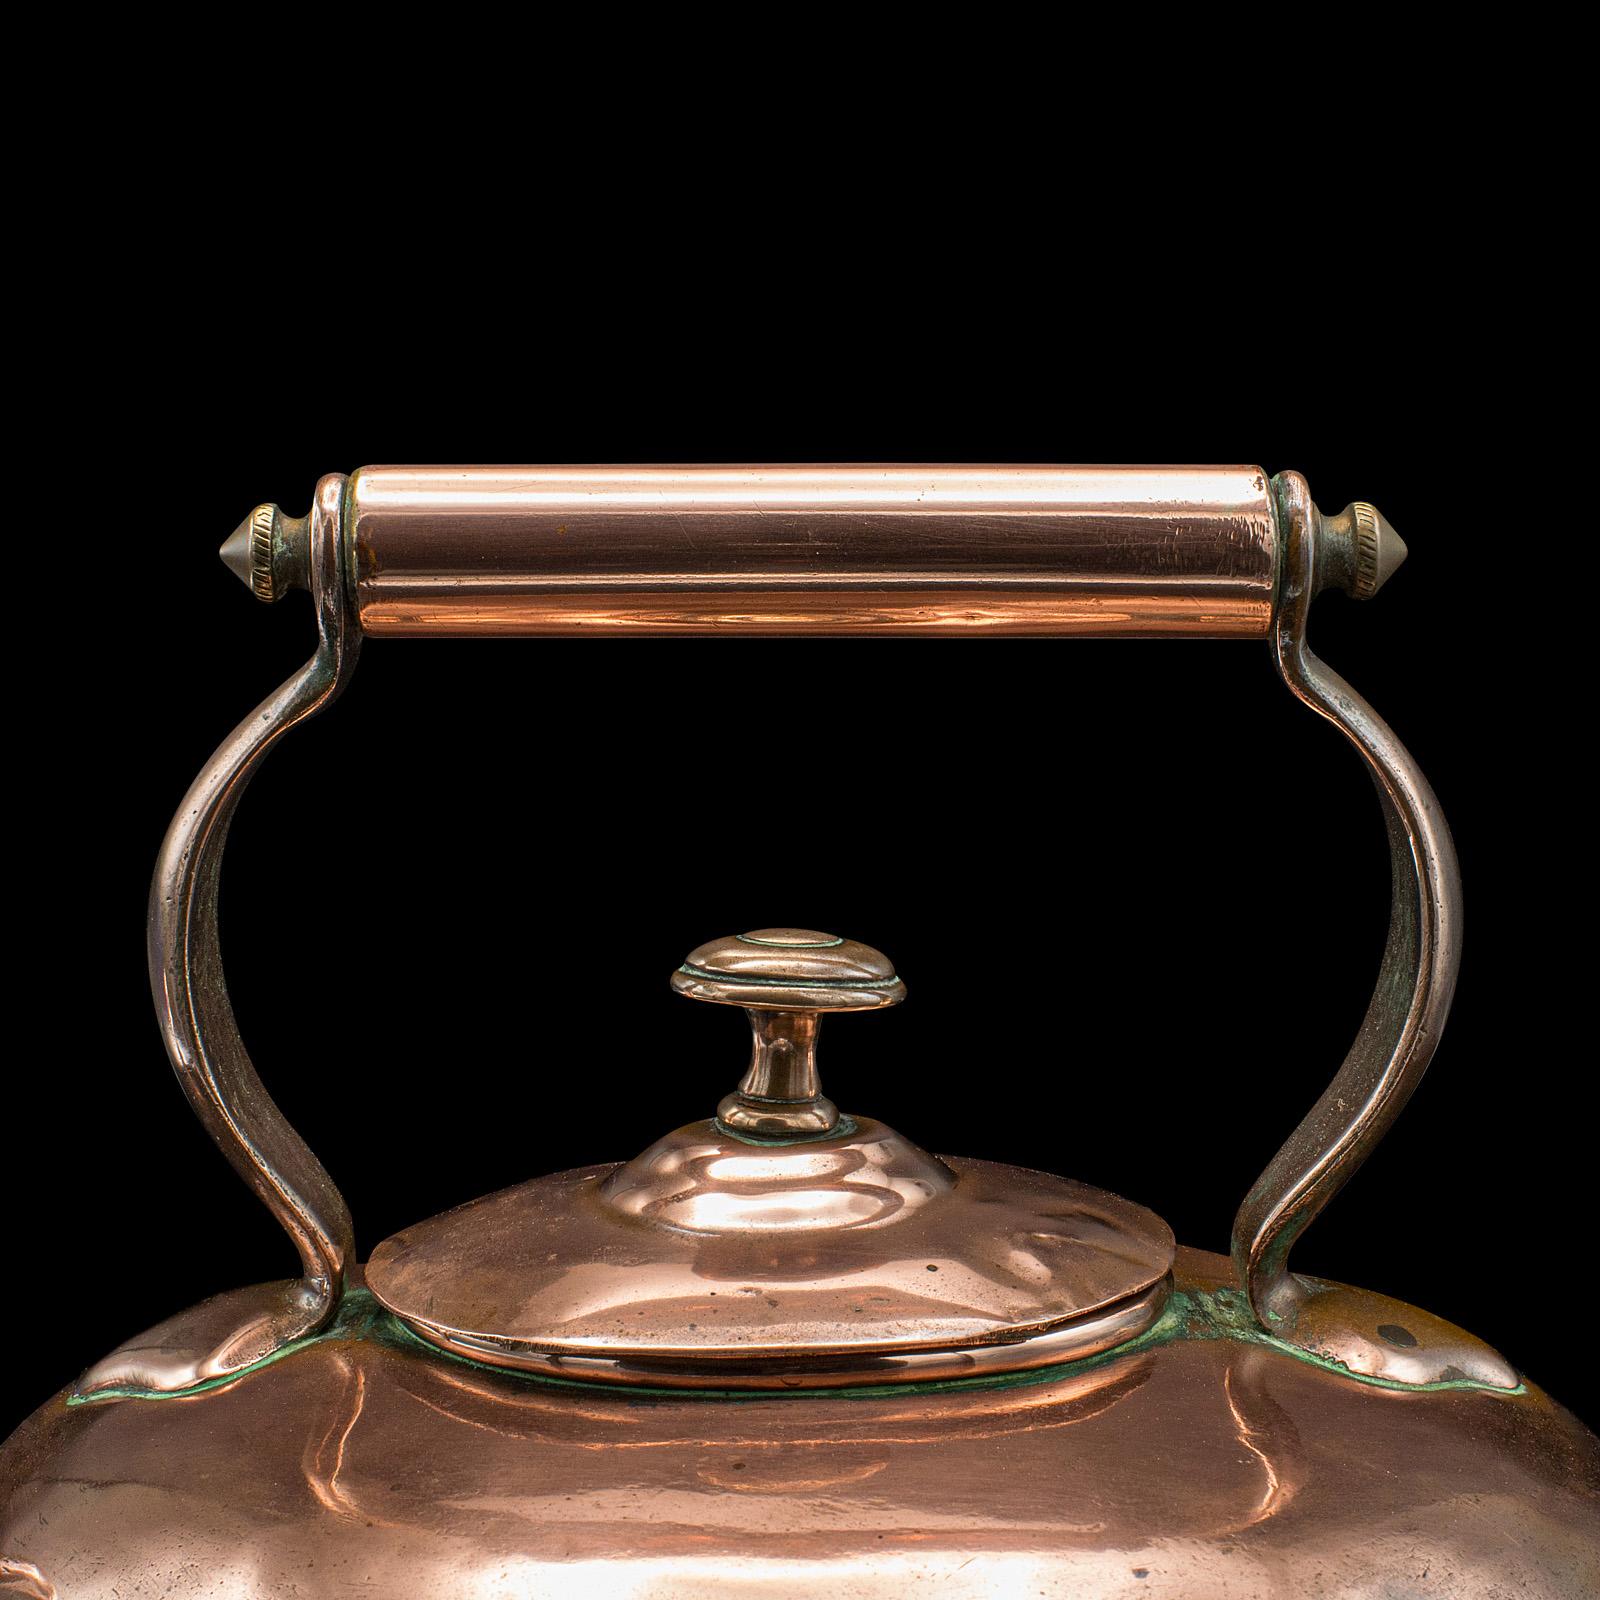 Antique Scullery Kettle, English, Copper, Stovetop Teapot, Victorian, Circa 1870 For Sale 3